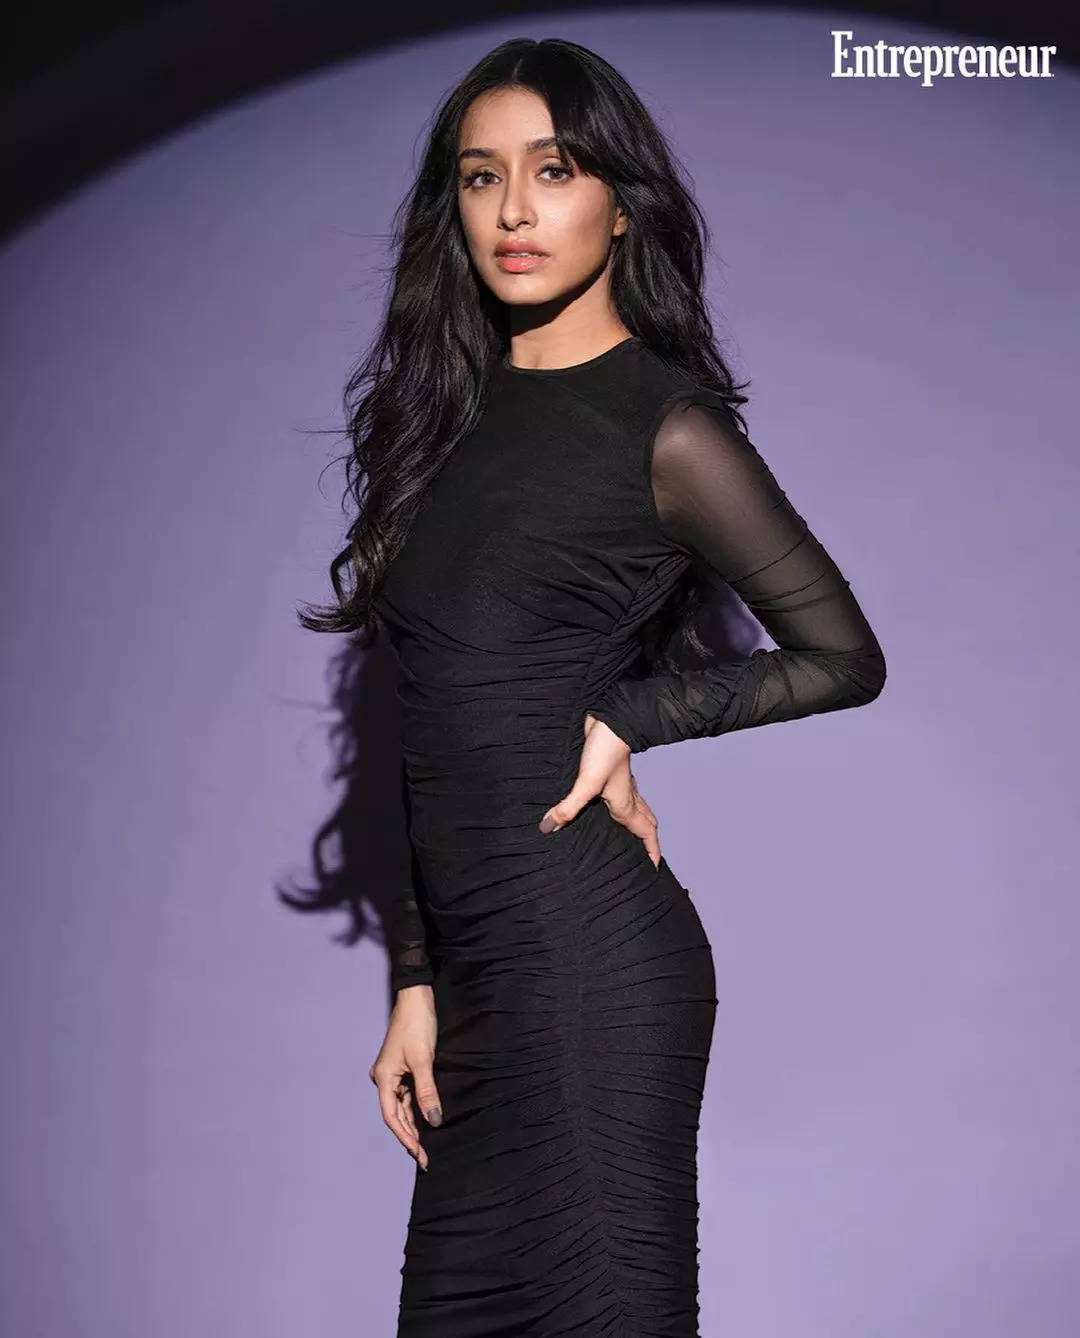 Shraddha Kapoor chose a black outfit from Reem Acra's autumn/winter 2019  collection. The two-piece look … | Shraddha kapoor cute, Shraddha kapoor,  Bollywood fashion